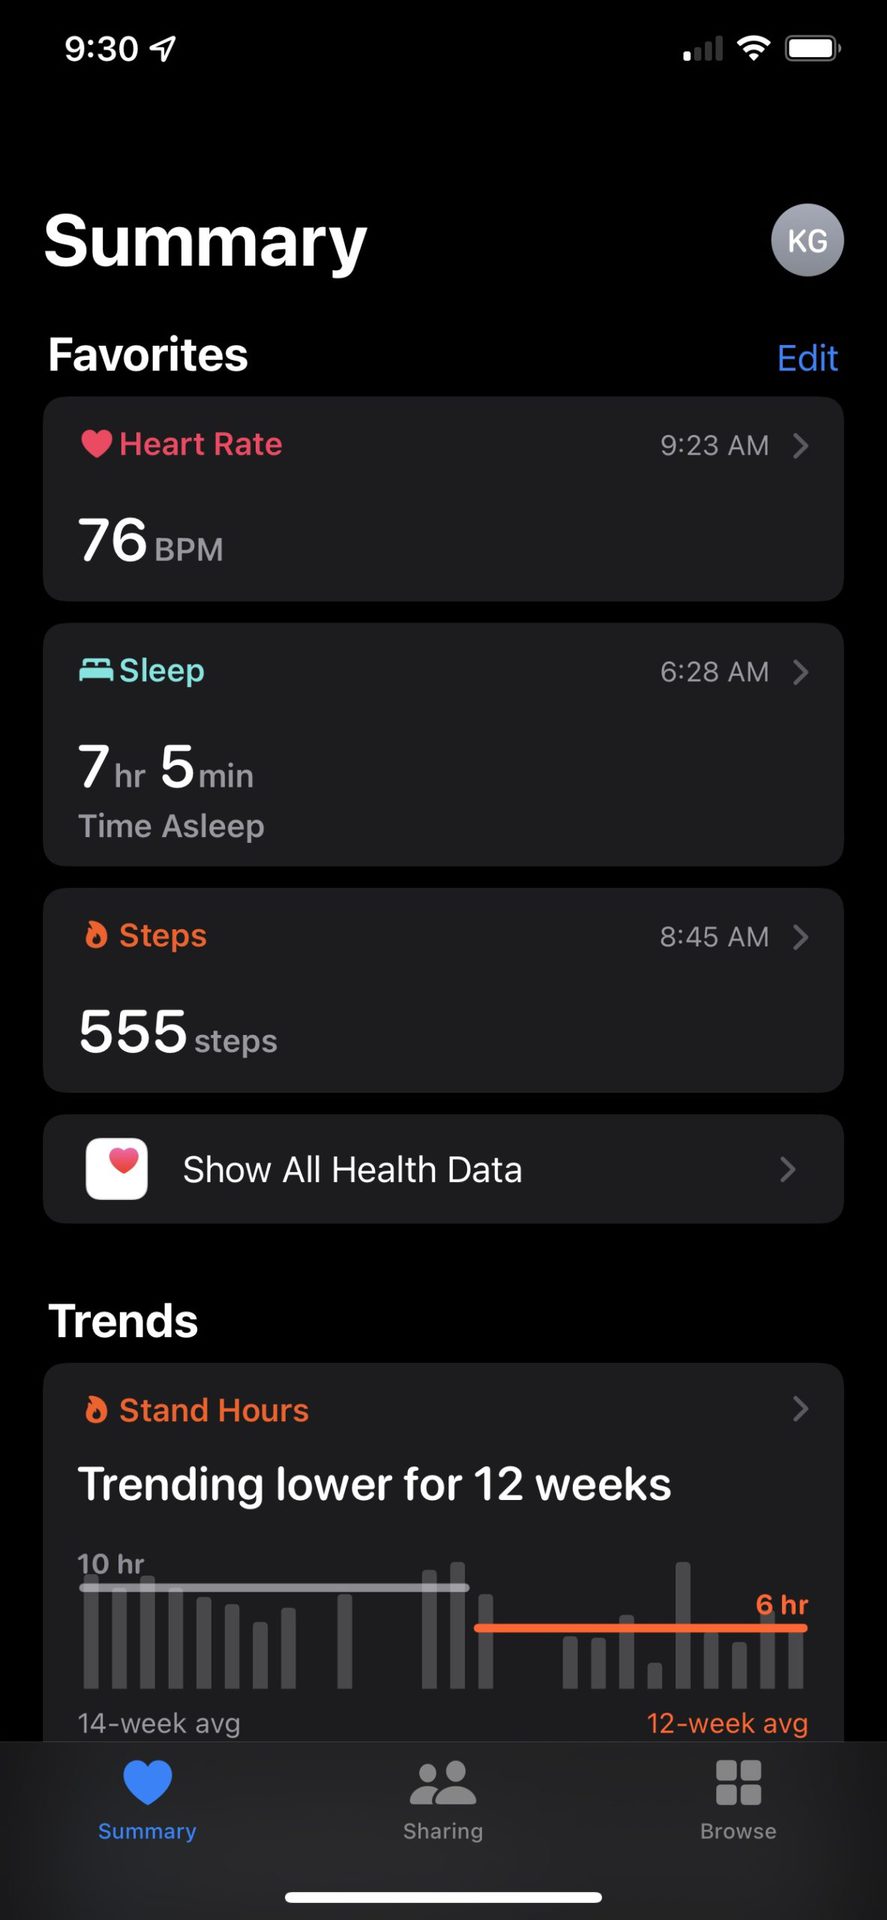 A screen shot of the Apple Health app shows the Summary tab where favorites, highlights, and trends are listed.